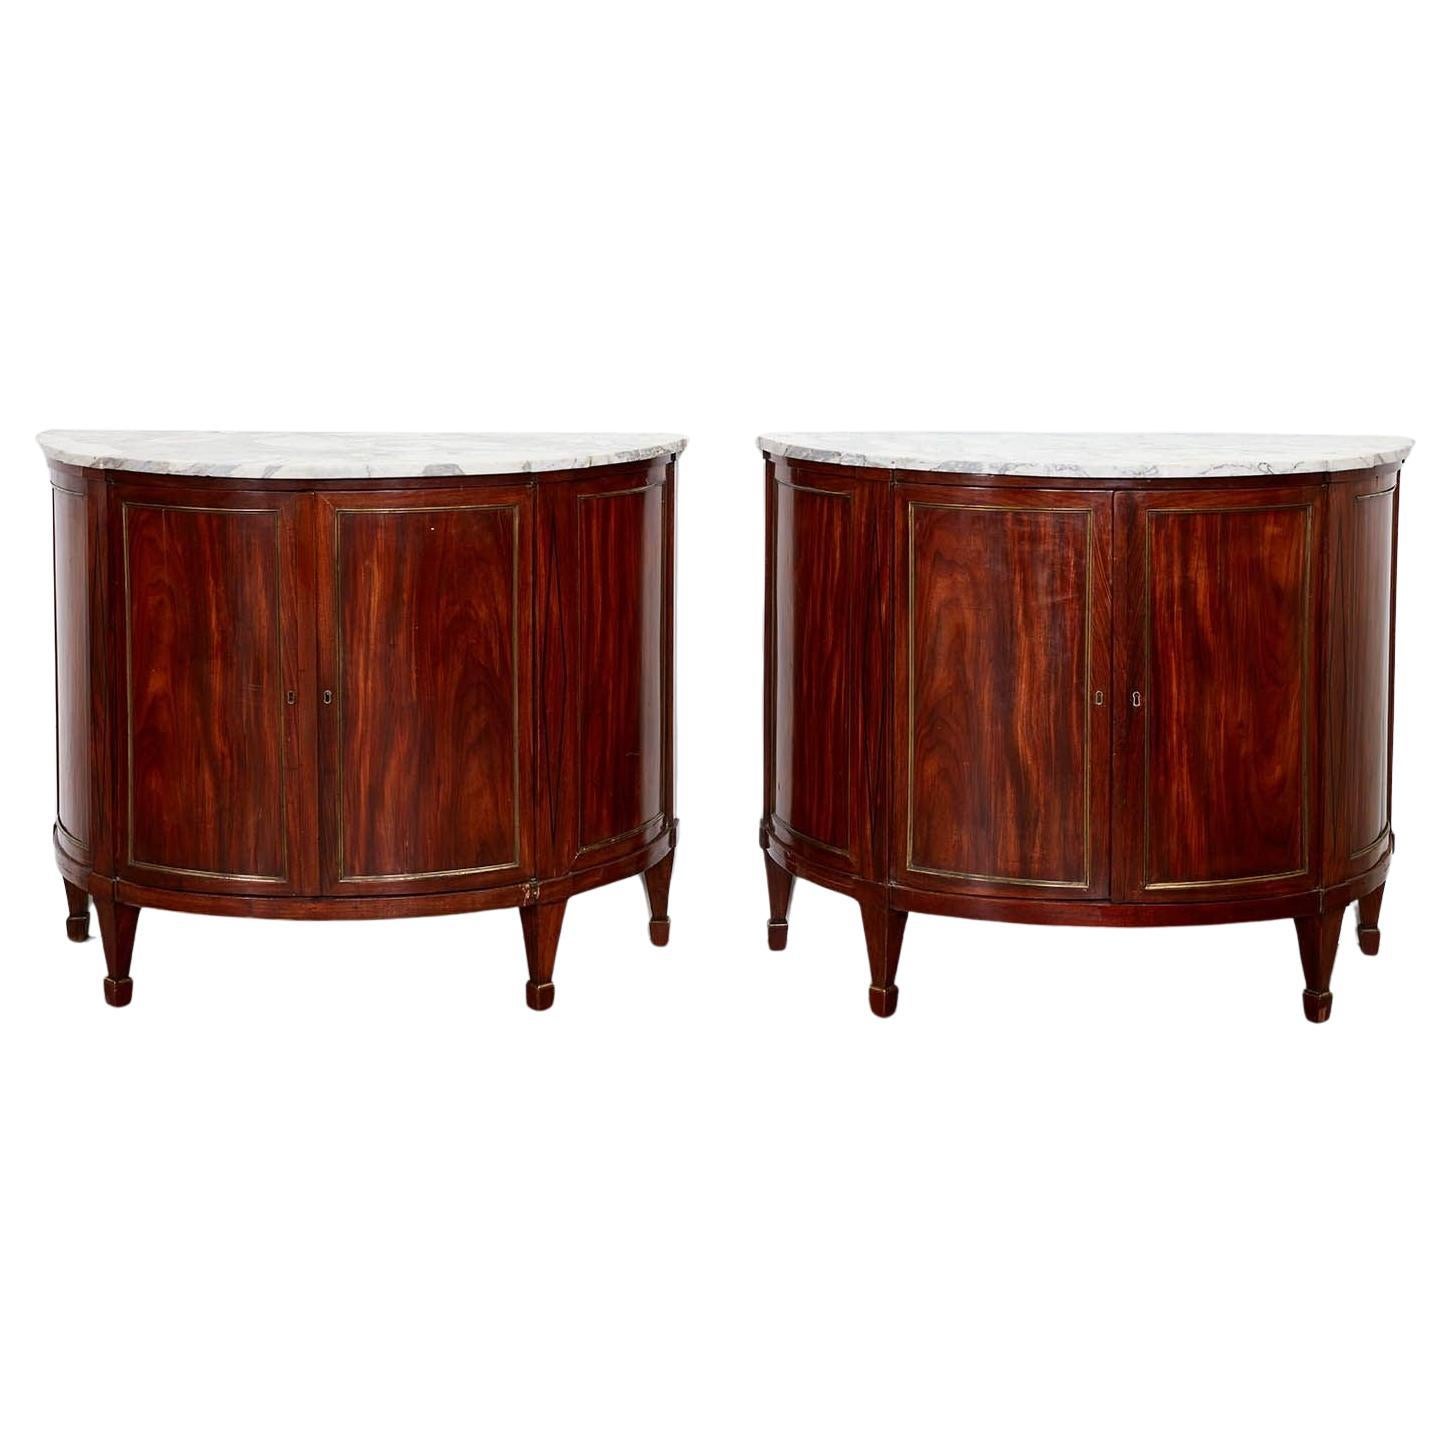 Pair of Neoclassical Demilune Commodes For Sale